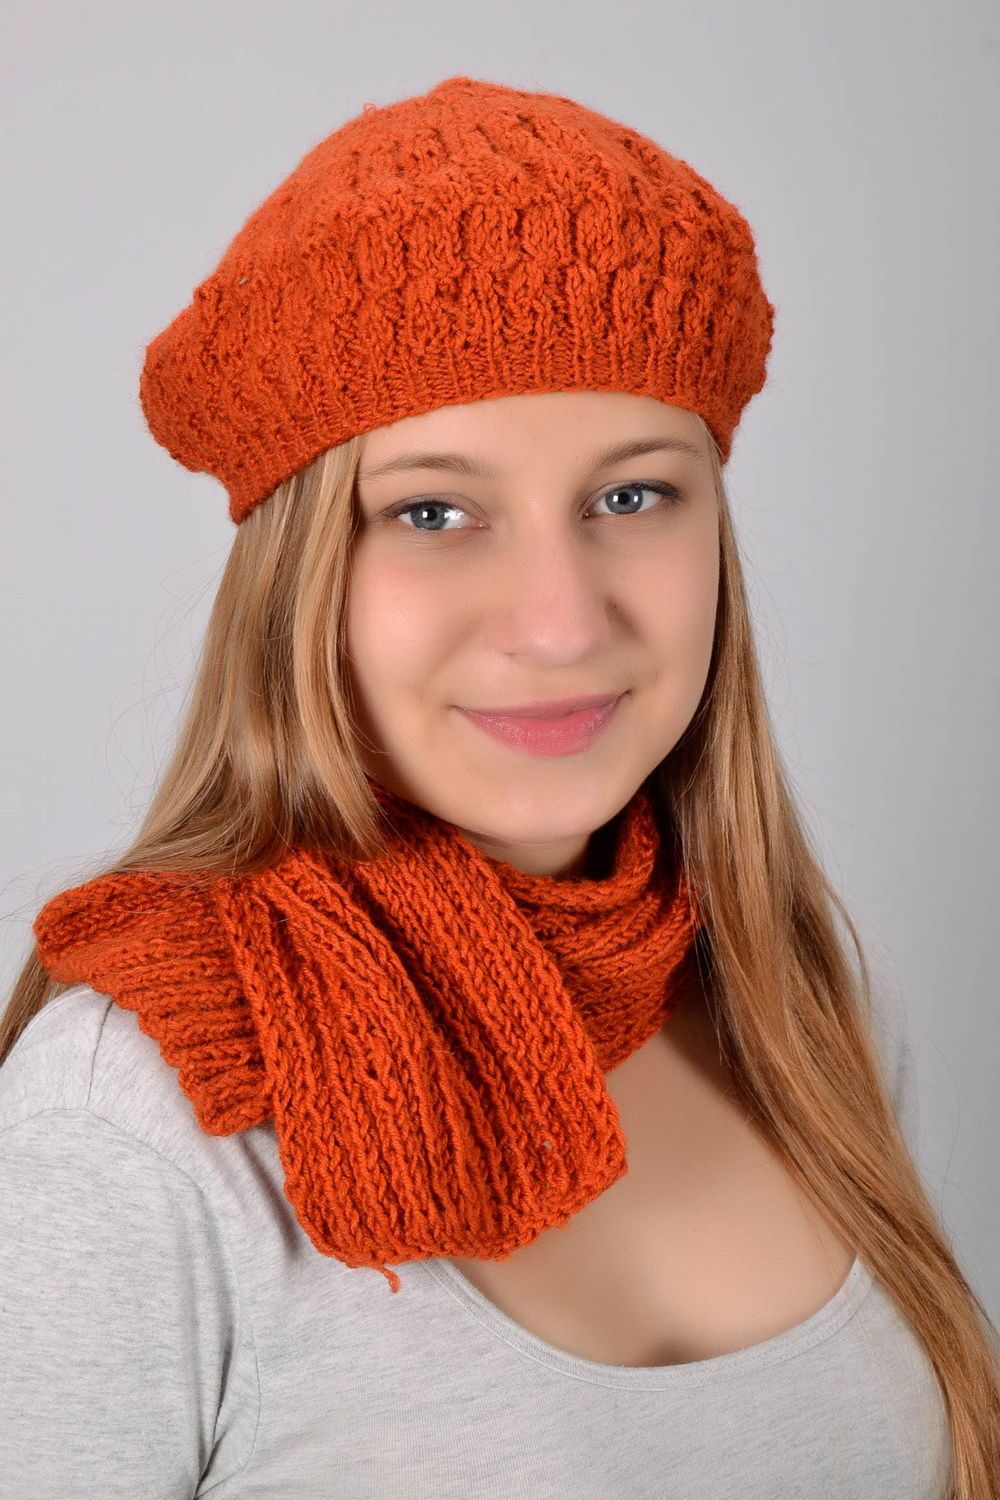 Beret and scarf knitted with needles photo 2